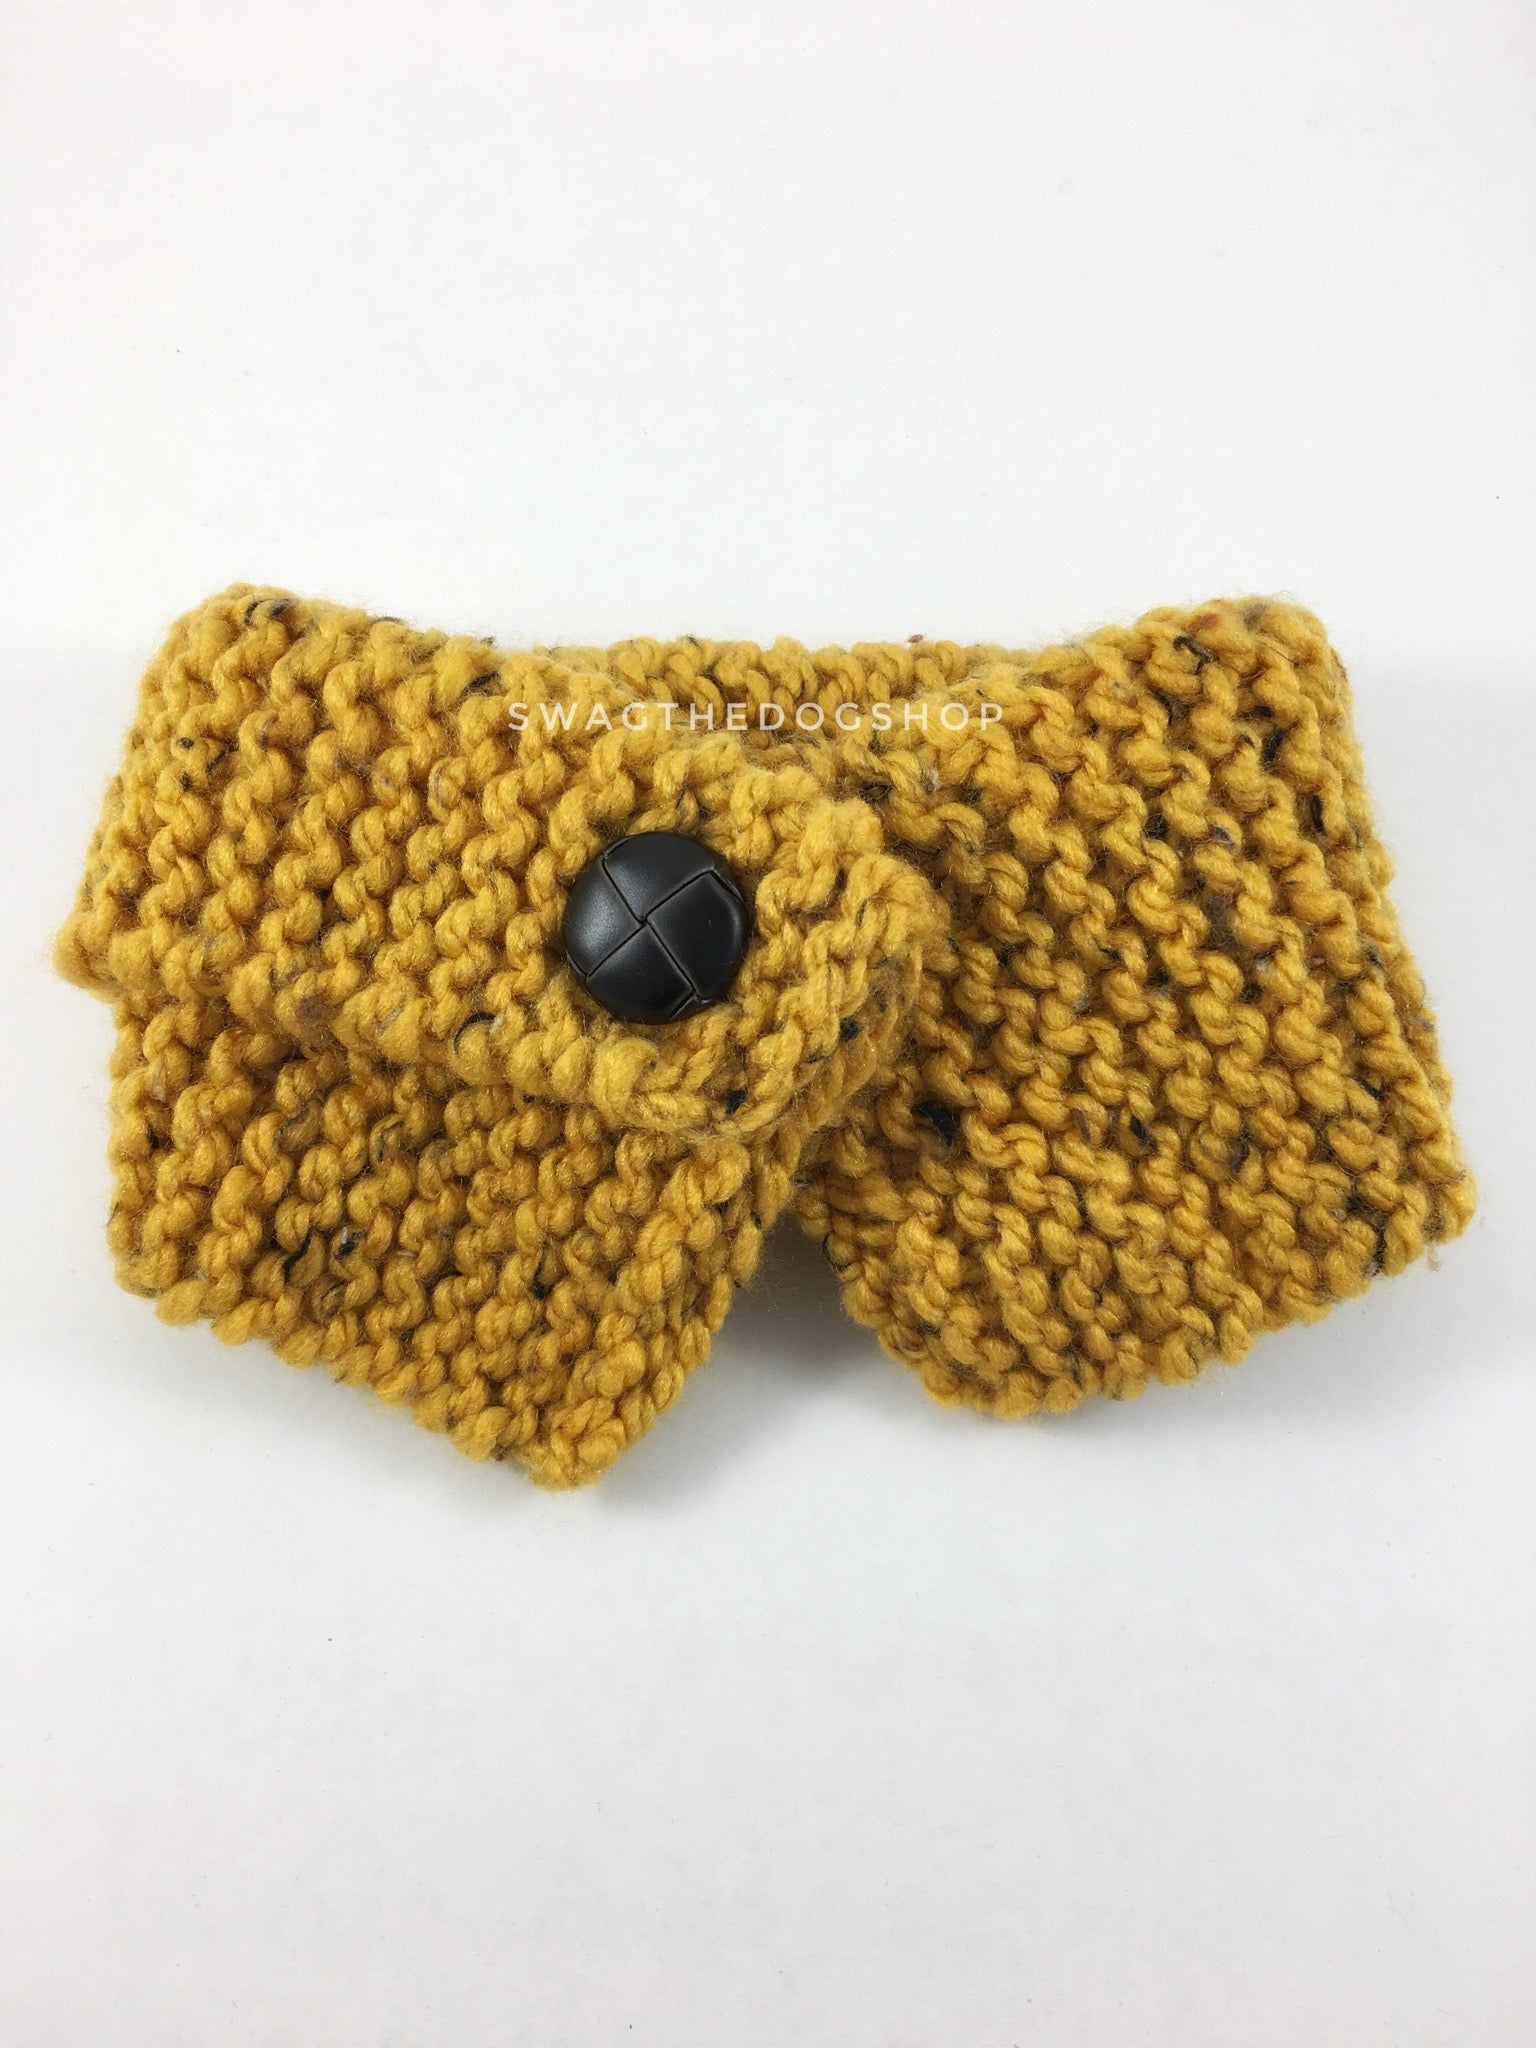 Honey Mustard Tweed Swagsnood - Product Front View. Honey Mustard Color with Black Speck Tweed Dog Snood with Accent Button